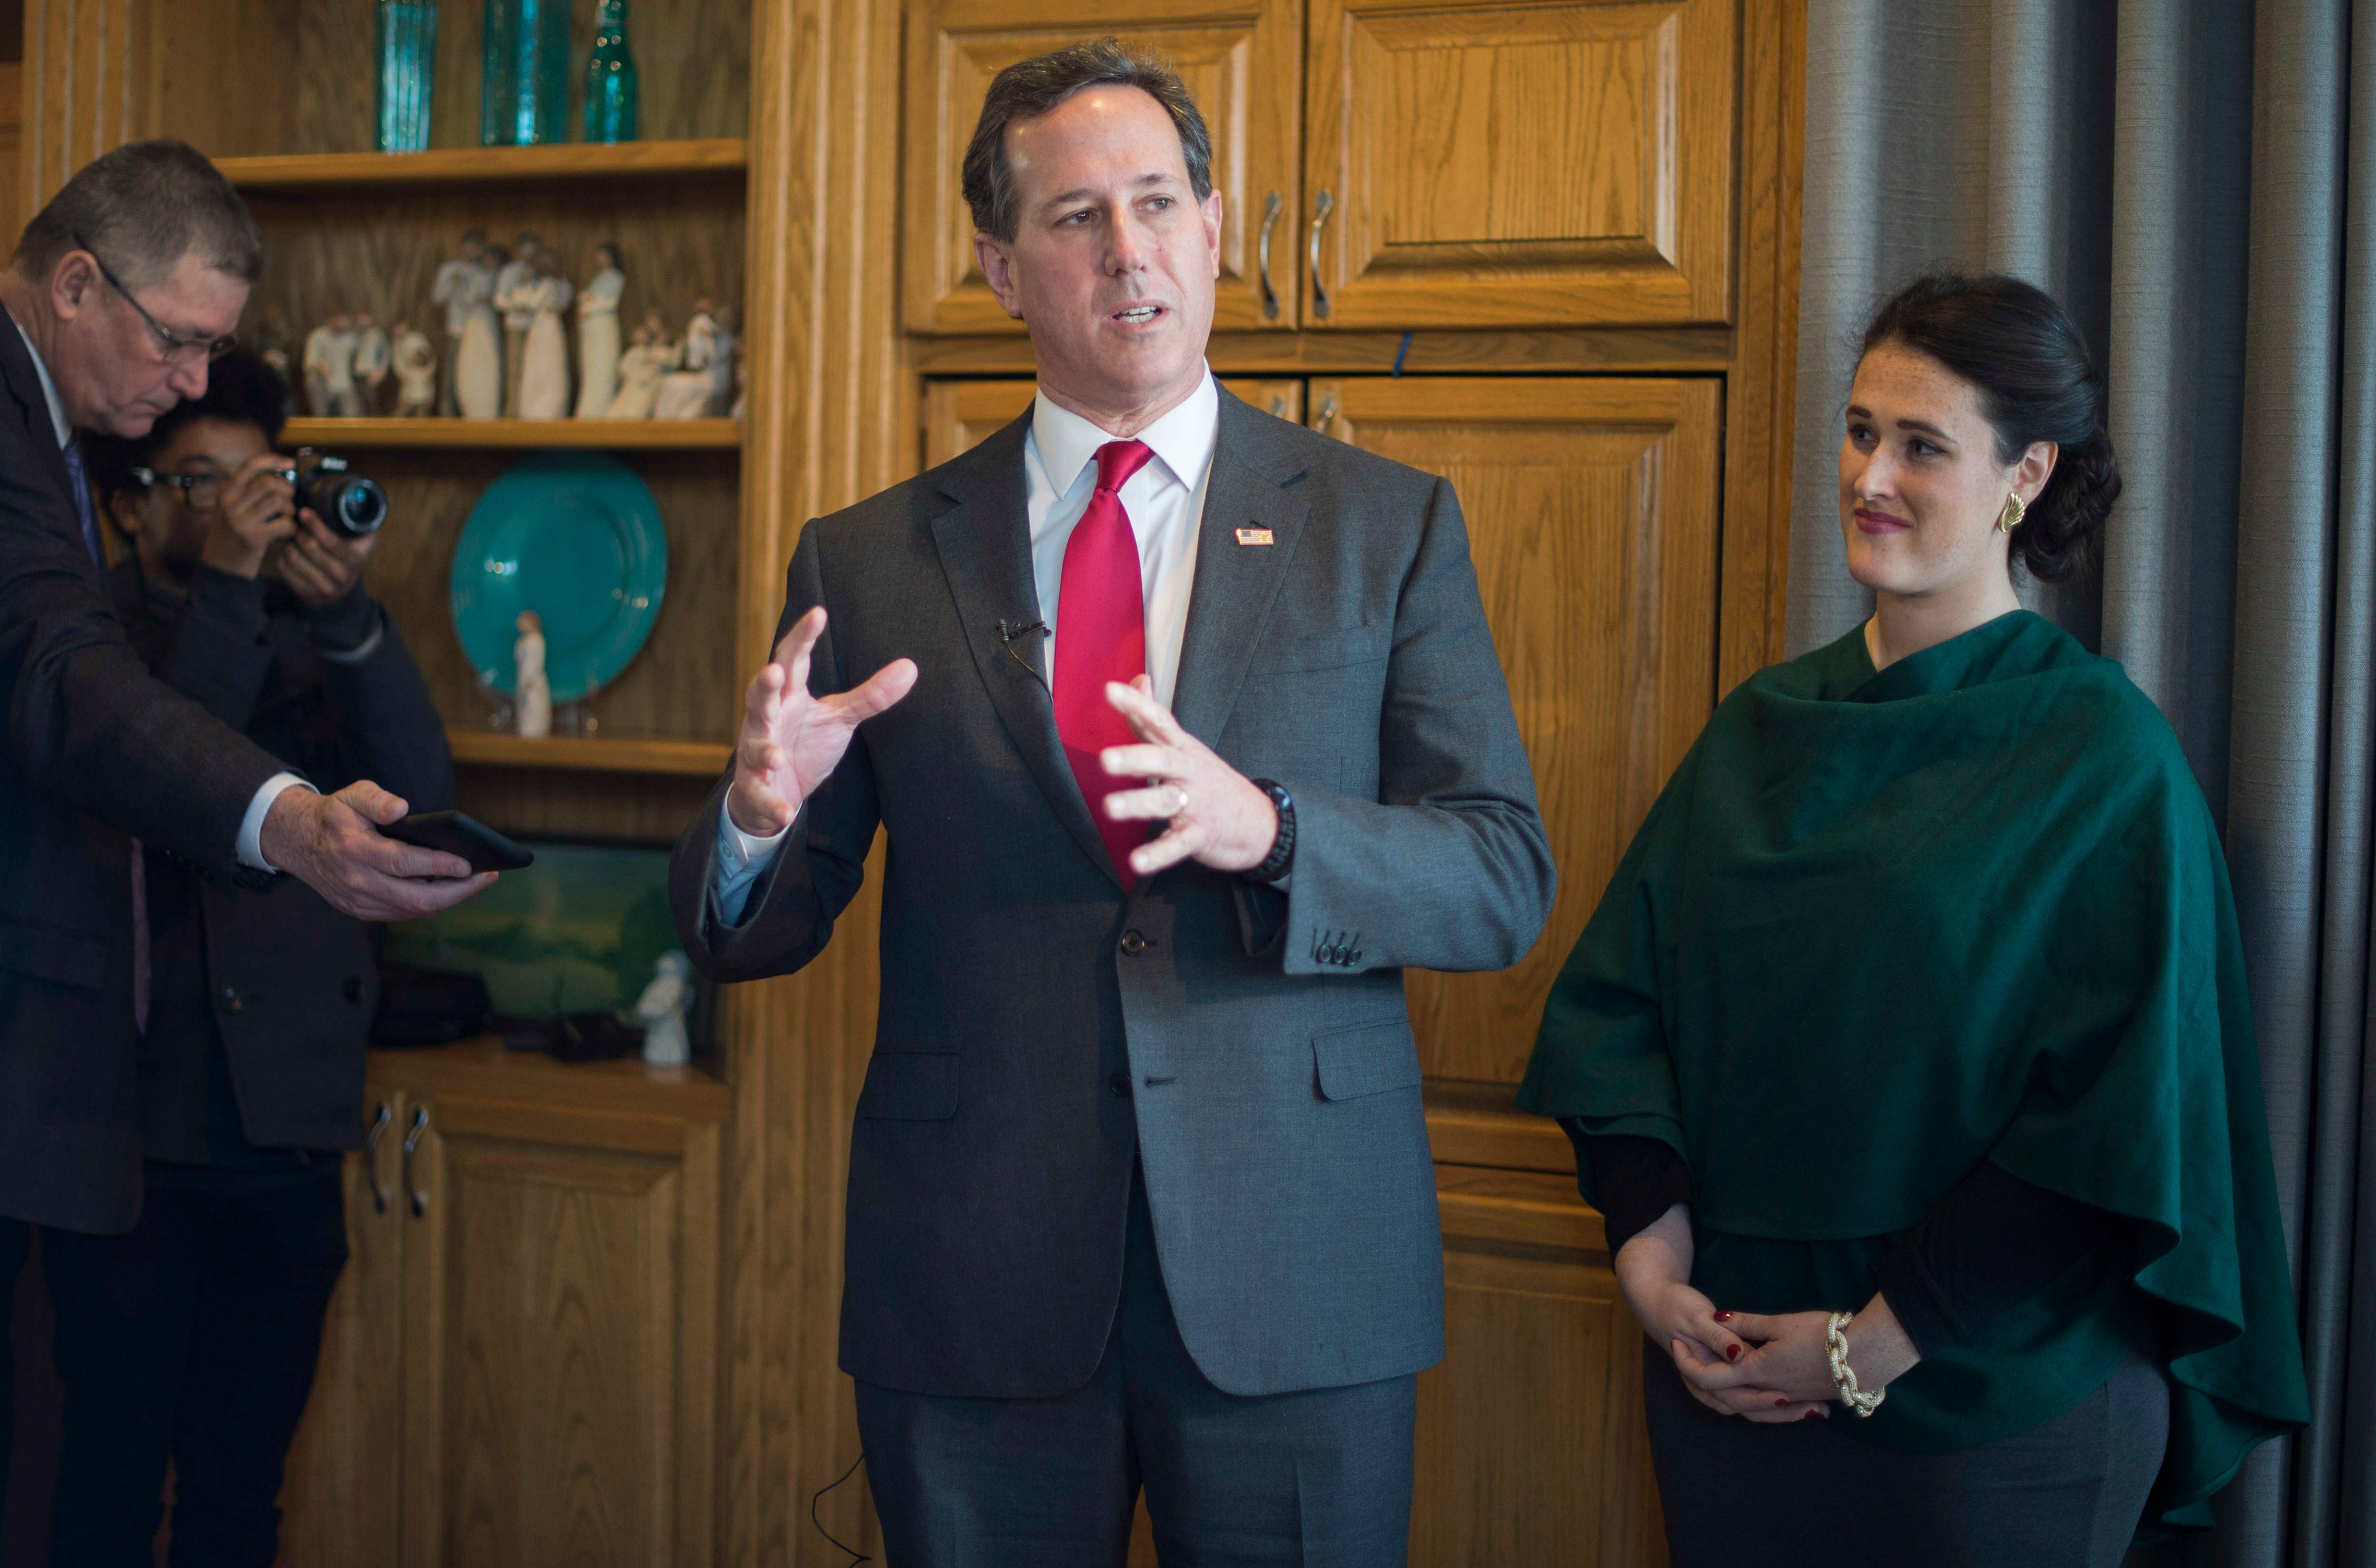 Republican presidential candidate Rick Santorum speaks beside daughter Elizabeth during a campaign stop at a private residence in West Des Moines, Iowa, on Jan. 31, 2016, ahead of the Iowa Caucus. (Jim Watson—AFP/Getty Images)